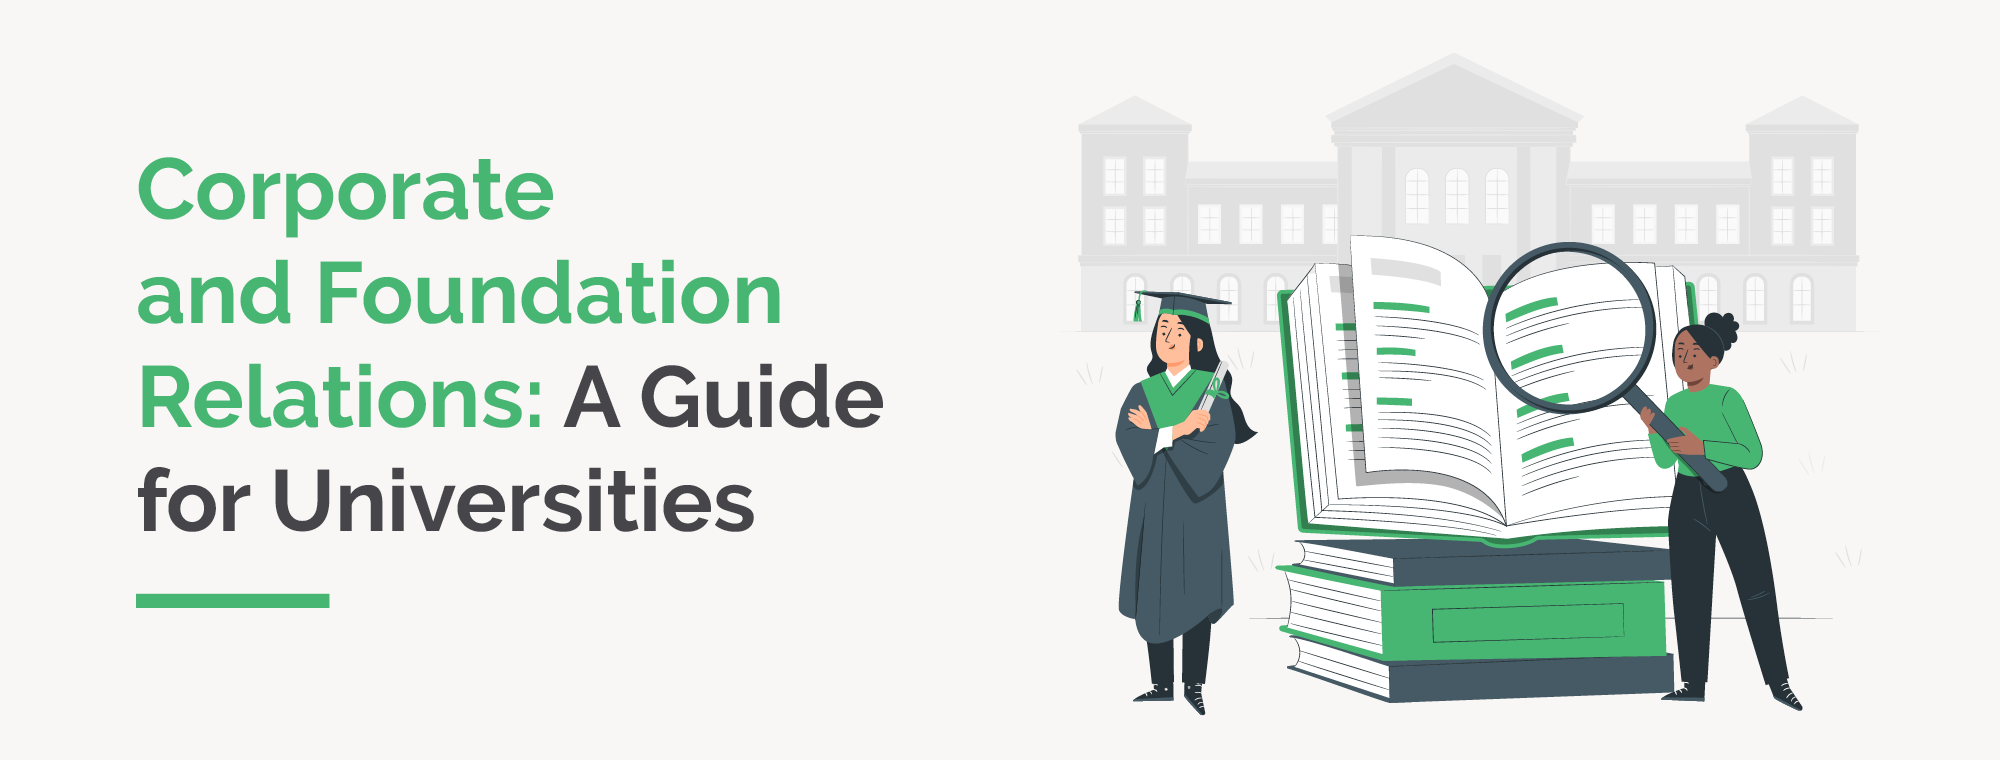 The title of the article: Corporate and foundation relations: A guide for universities next to an illustration of a graduate.